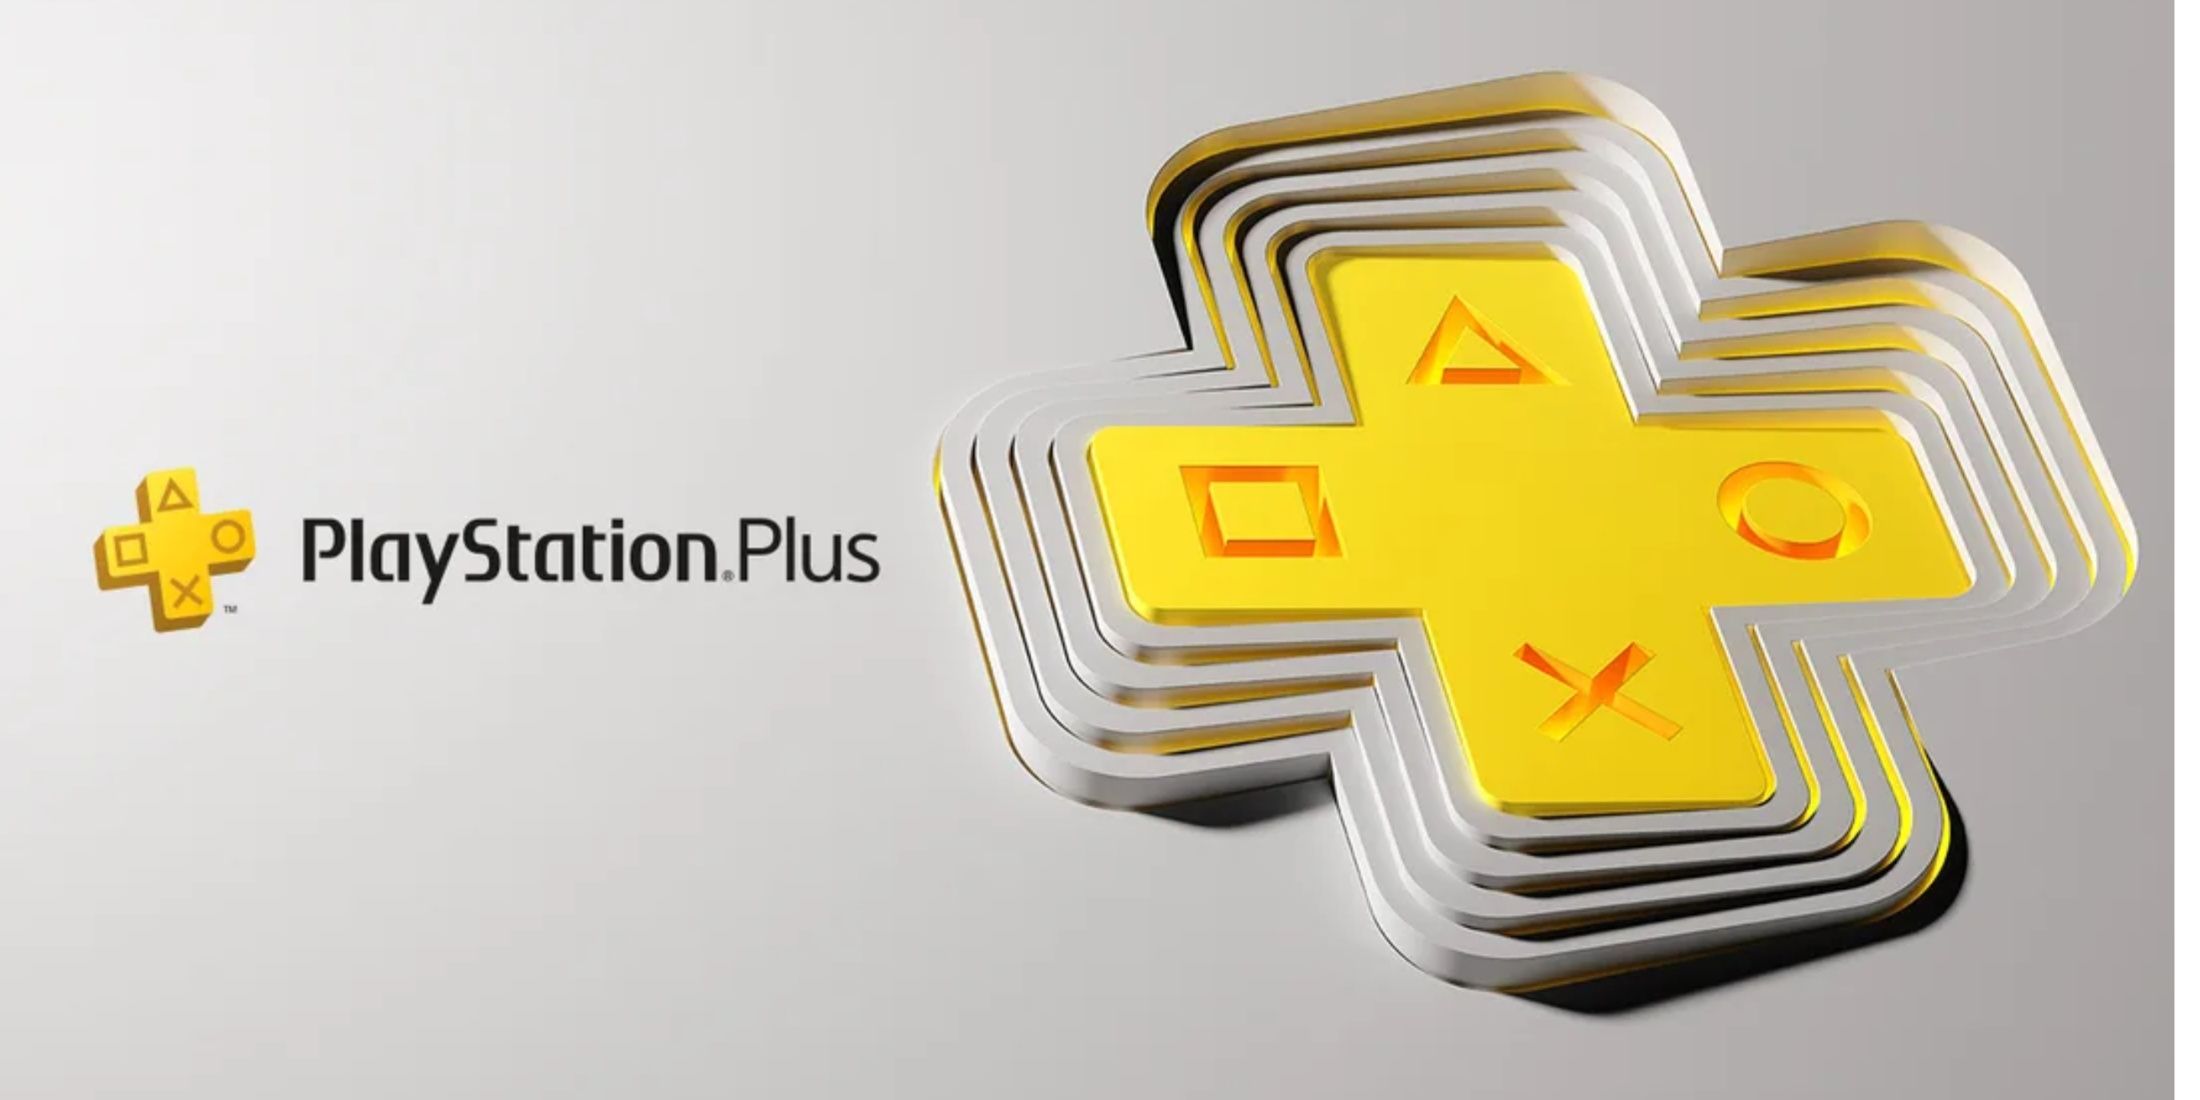 The logo for the PlayStation Plus subscription service.